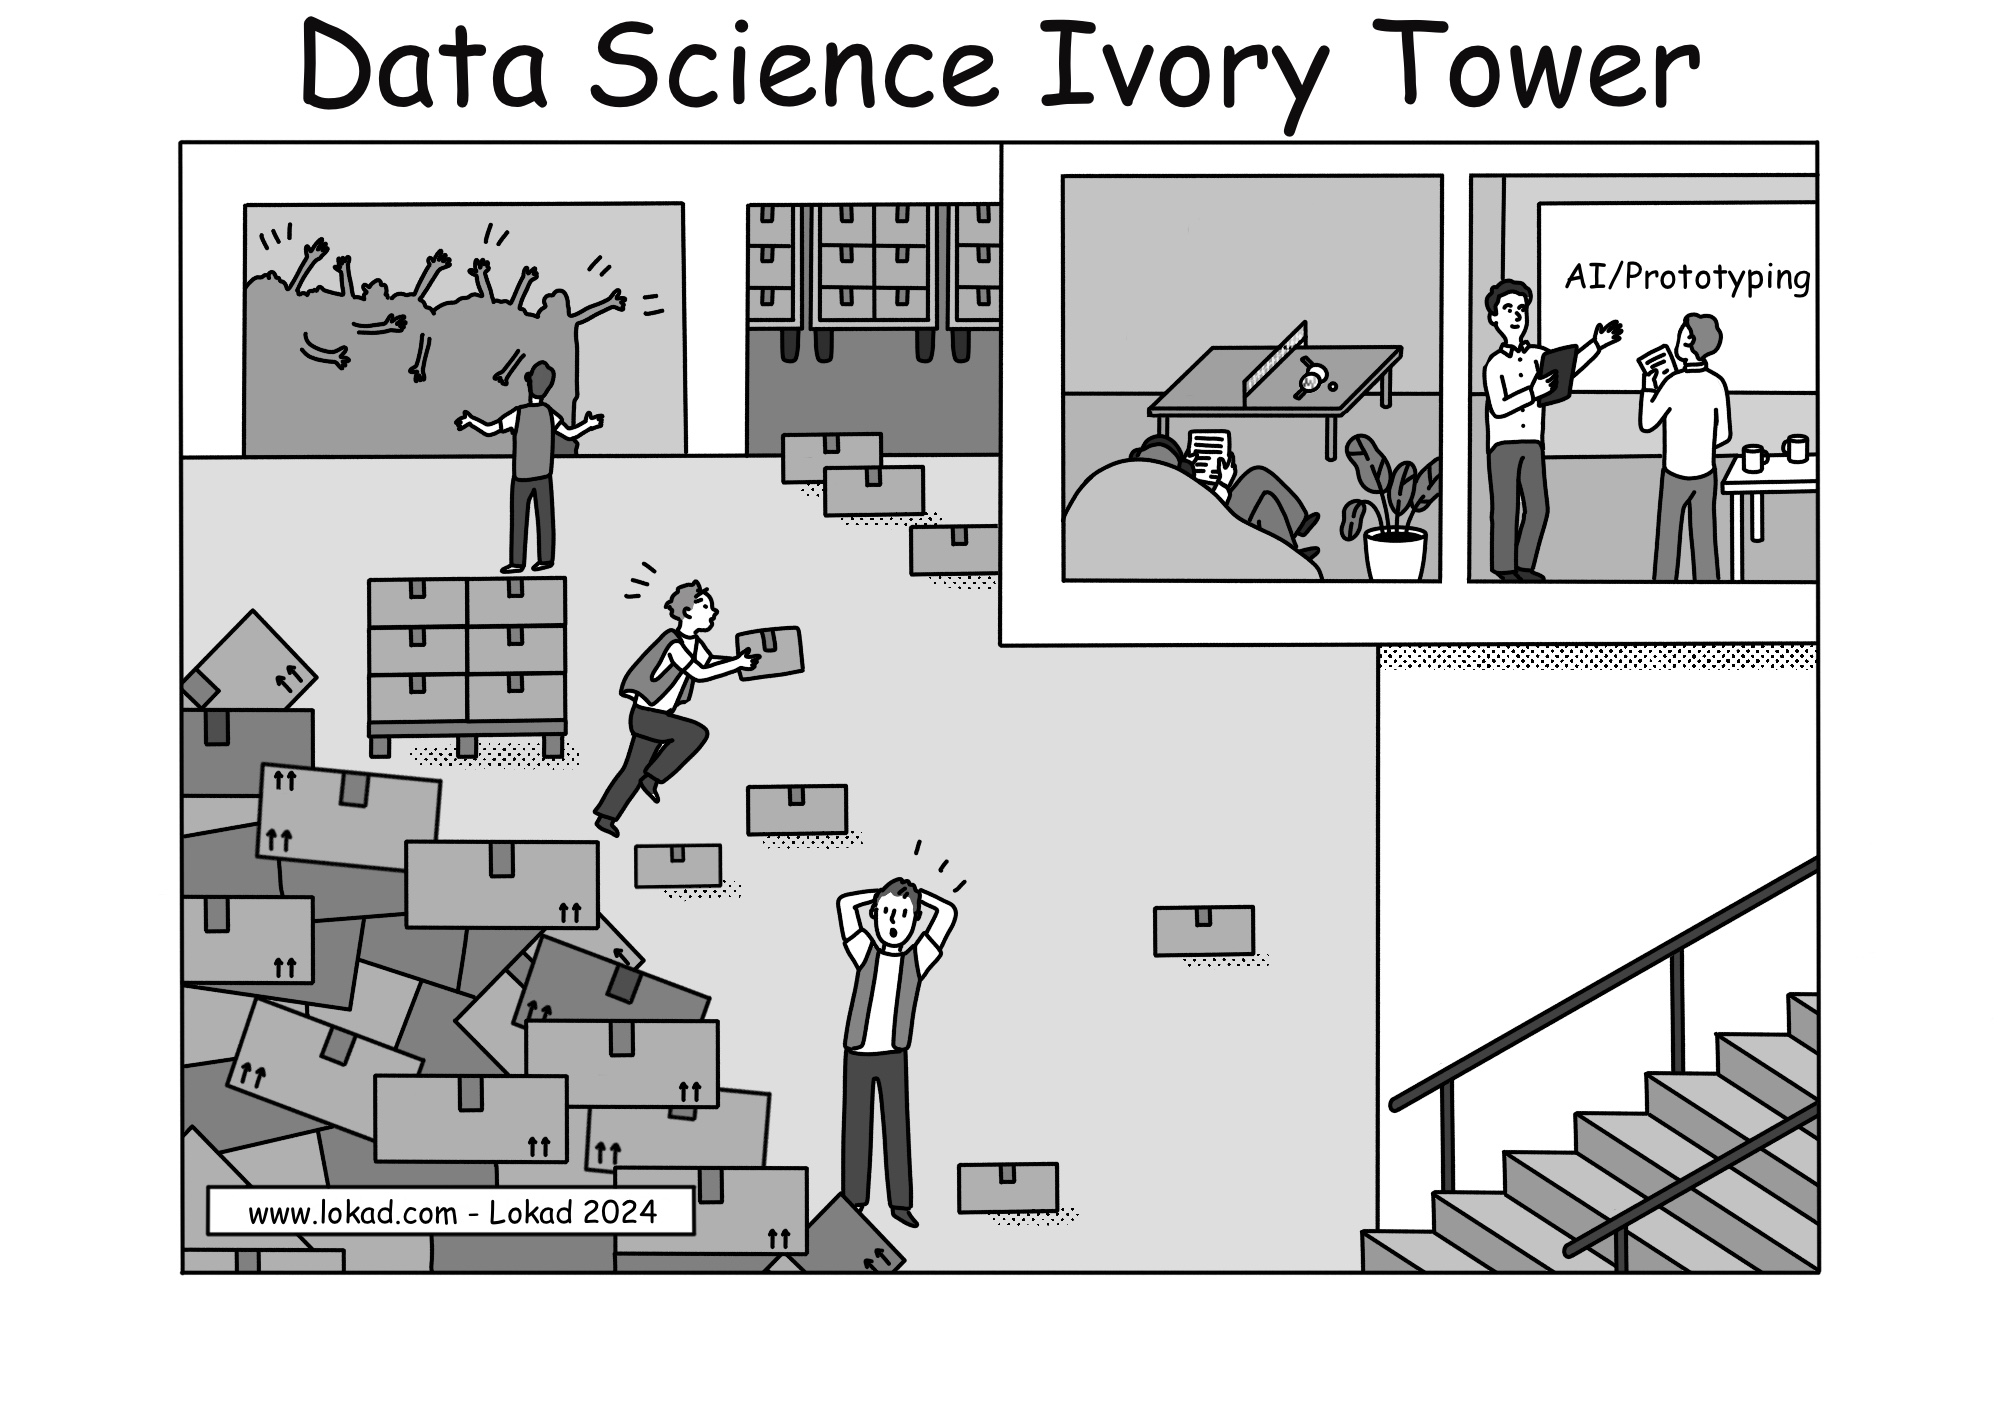 Data Science Ivory Tower